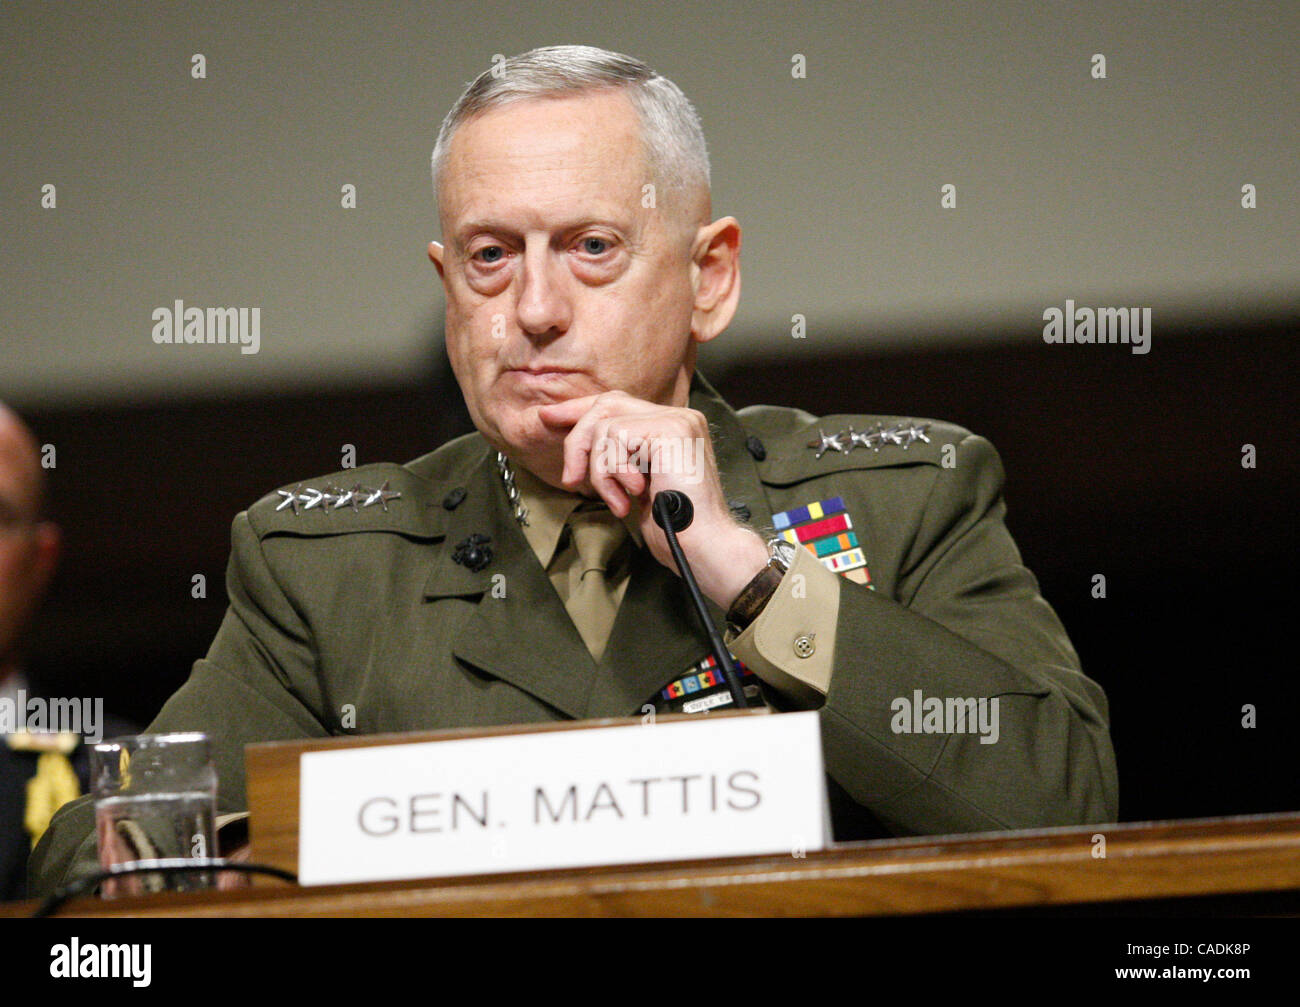 Jul 27, 2010 - Washington, District of Columbia, U.S. - Marine Corps Gen. JAMES MATTIS testifies before the Senate Armed Services committee for reappointment to the grade of general and to be commander of the United States Central Command on Capitol Hill.  (Credit Image: © Richard Clement/ZUMApress. Stock Photo